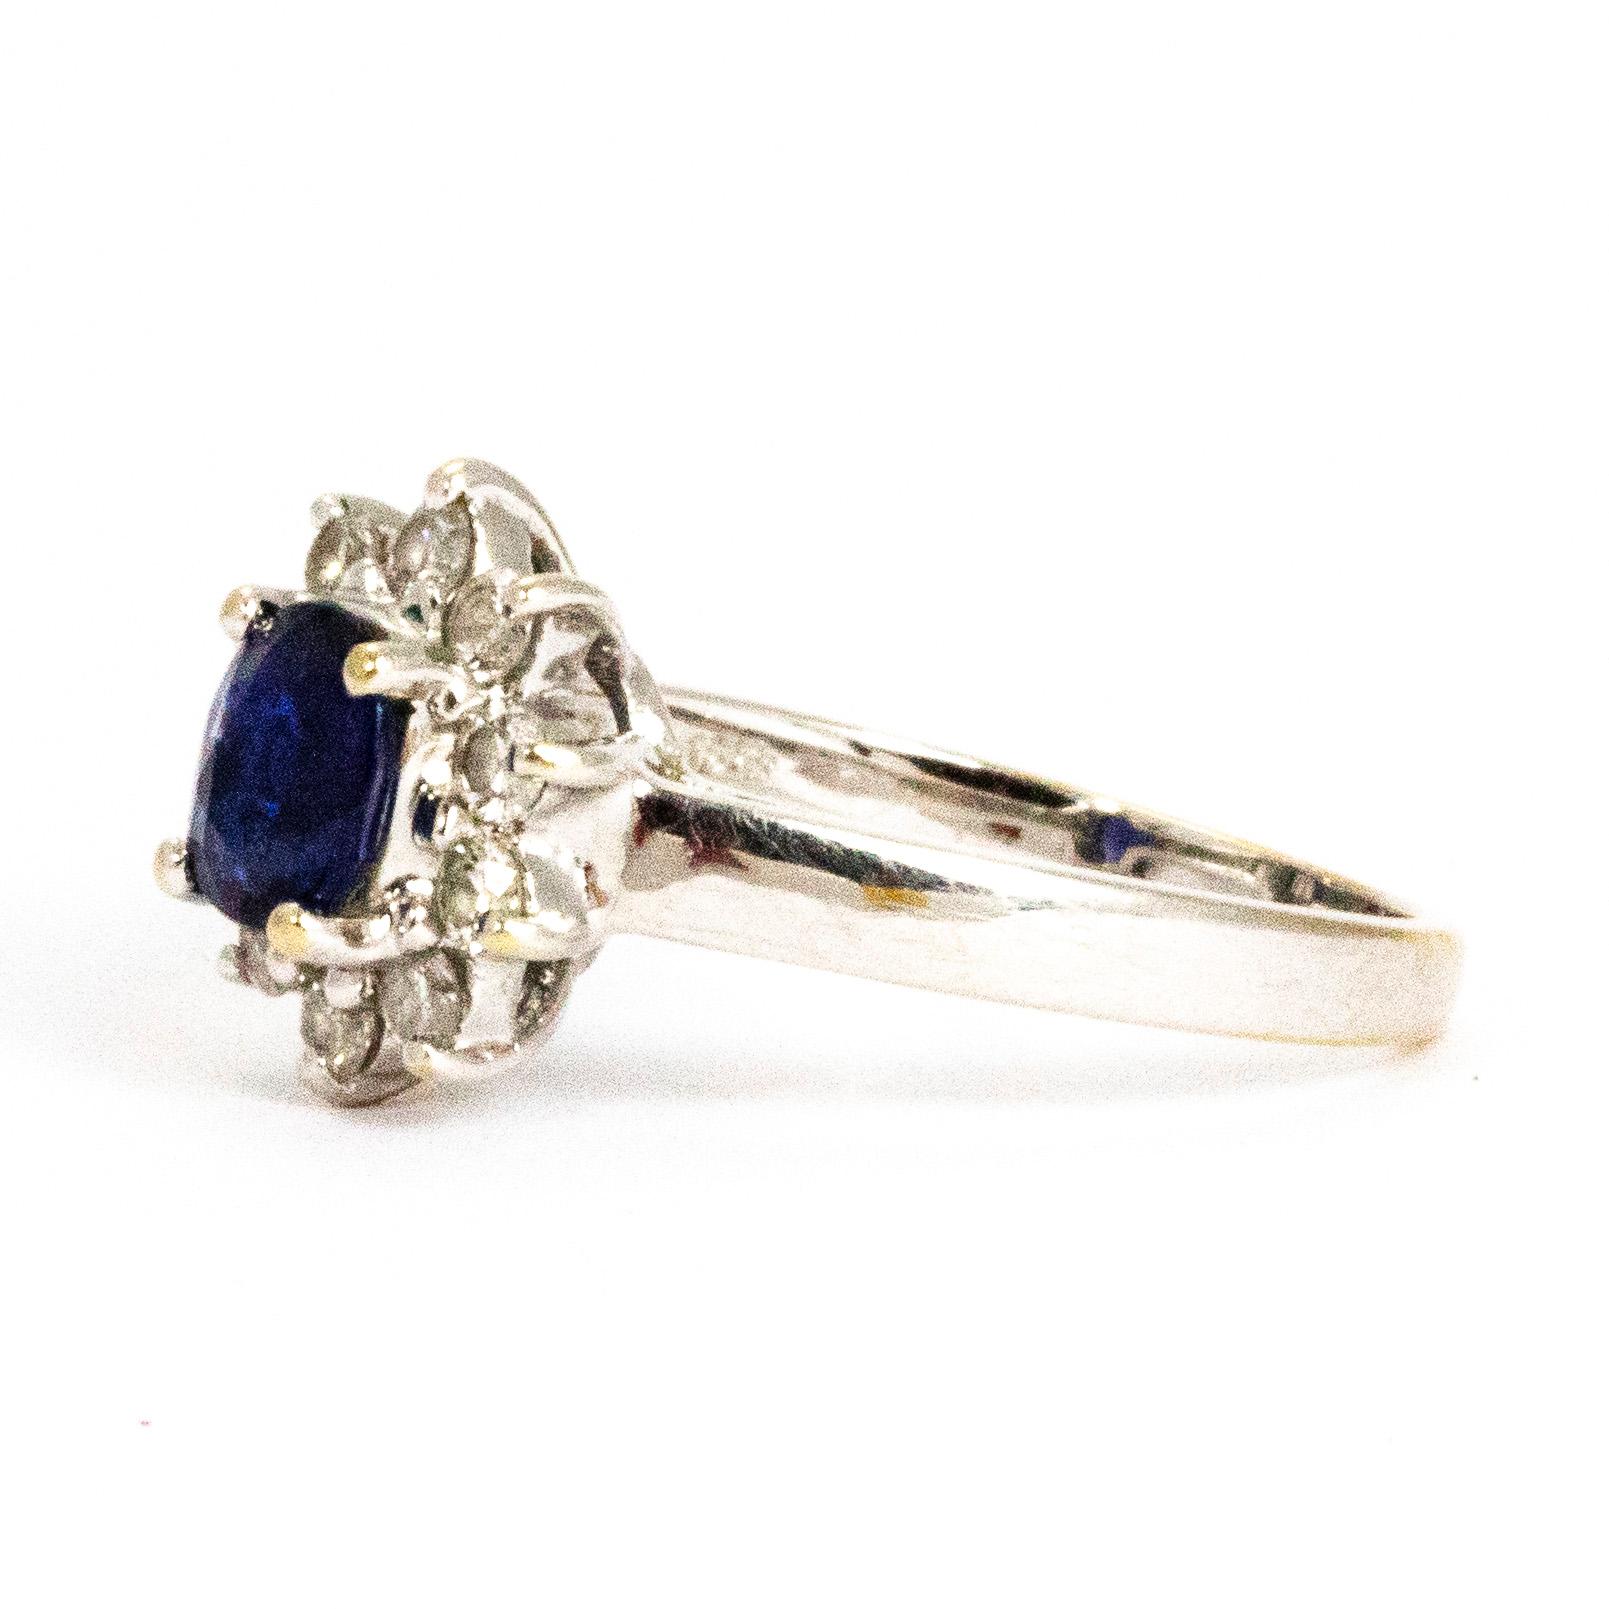 The sapphire at the centre of this beauty is an exquisite deep blue colour which is paired together perfectly with the halo of bright brilliant cut white diamonds that encircle it. The sapphire measures approximately 90pts and the diamonds measure a